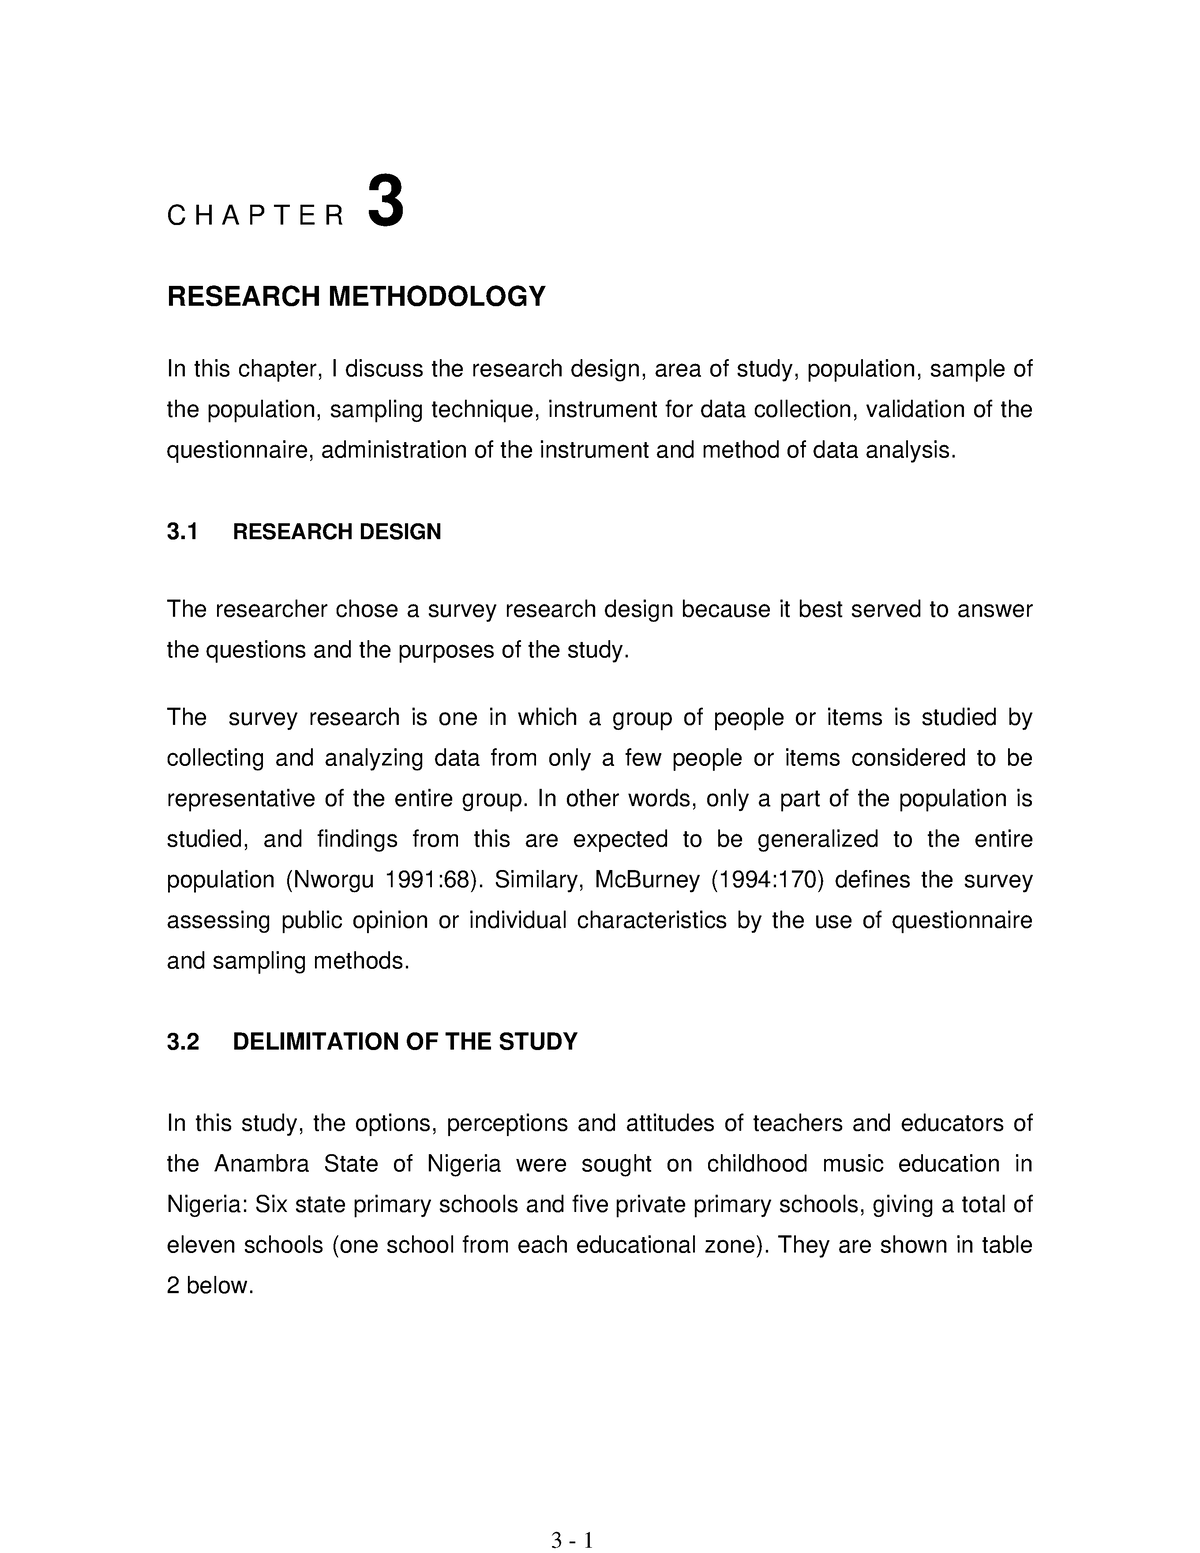 thesis chapter 3 methodology example